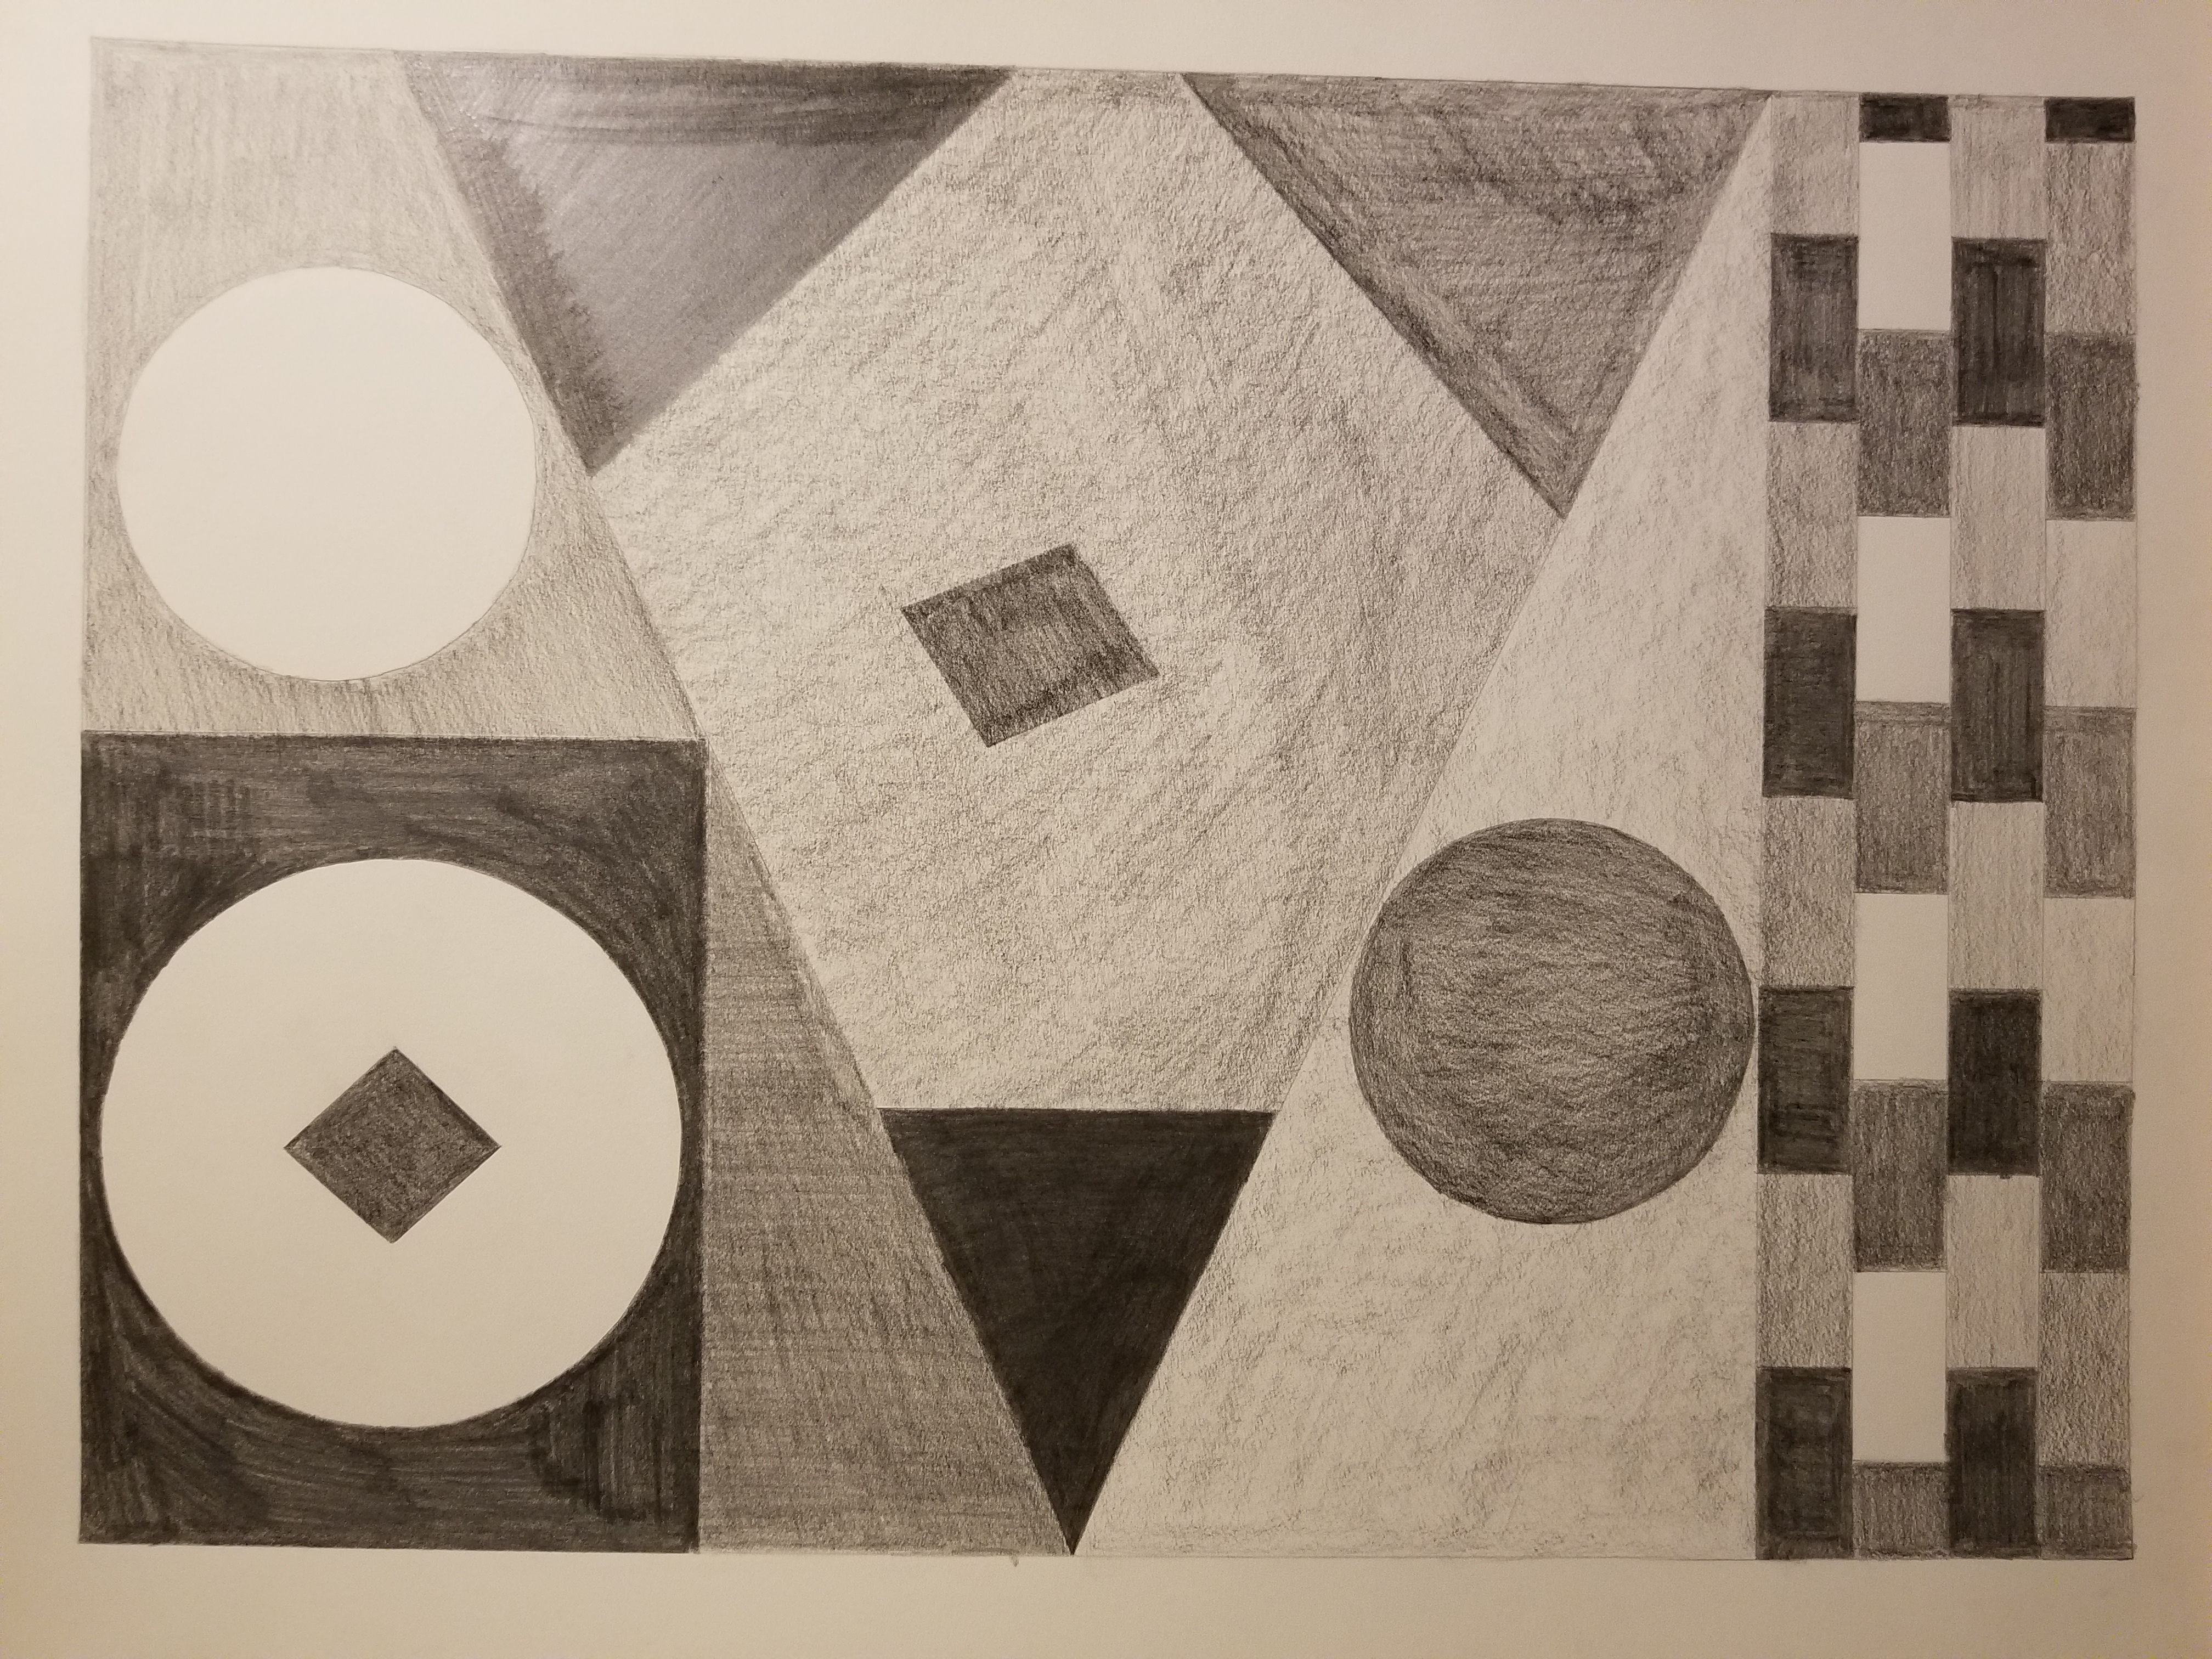 Different geometric shapes in different shades of graphite pencils.